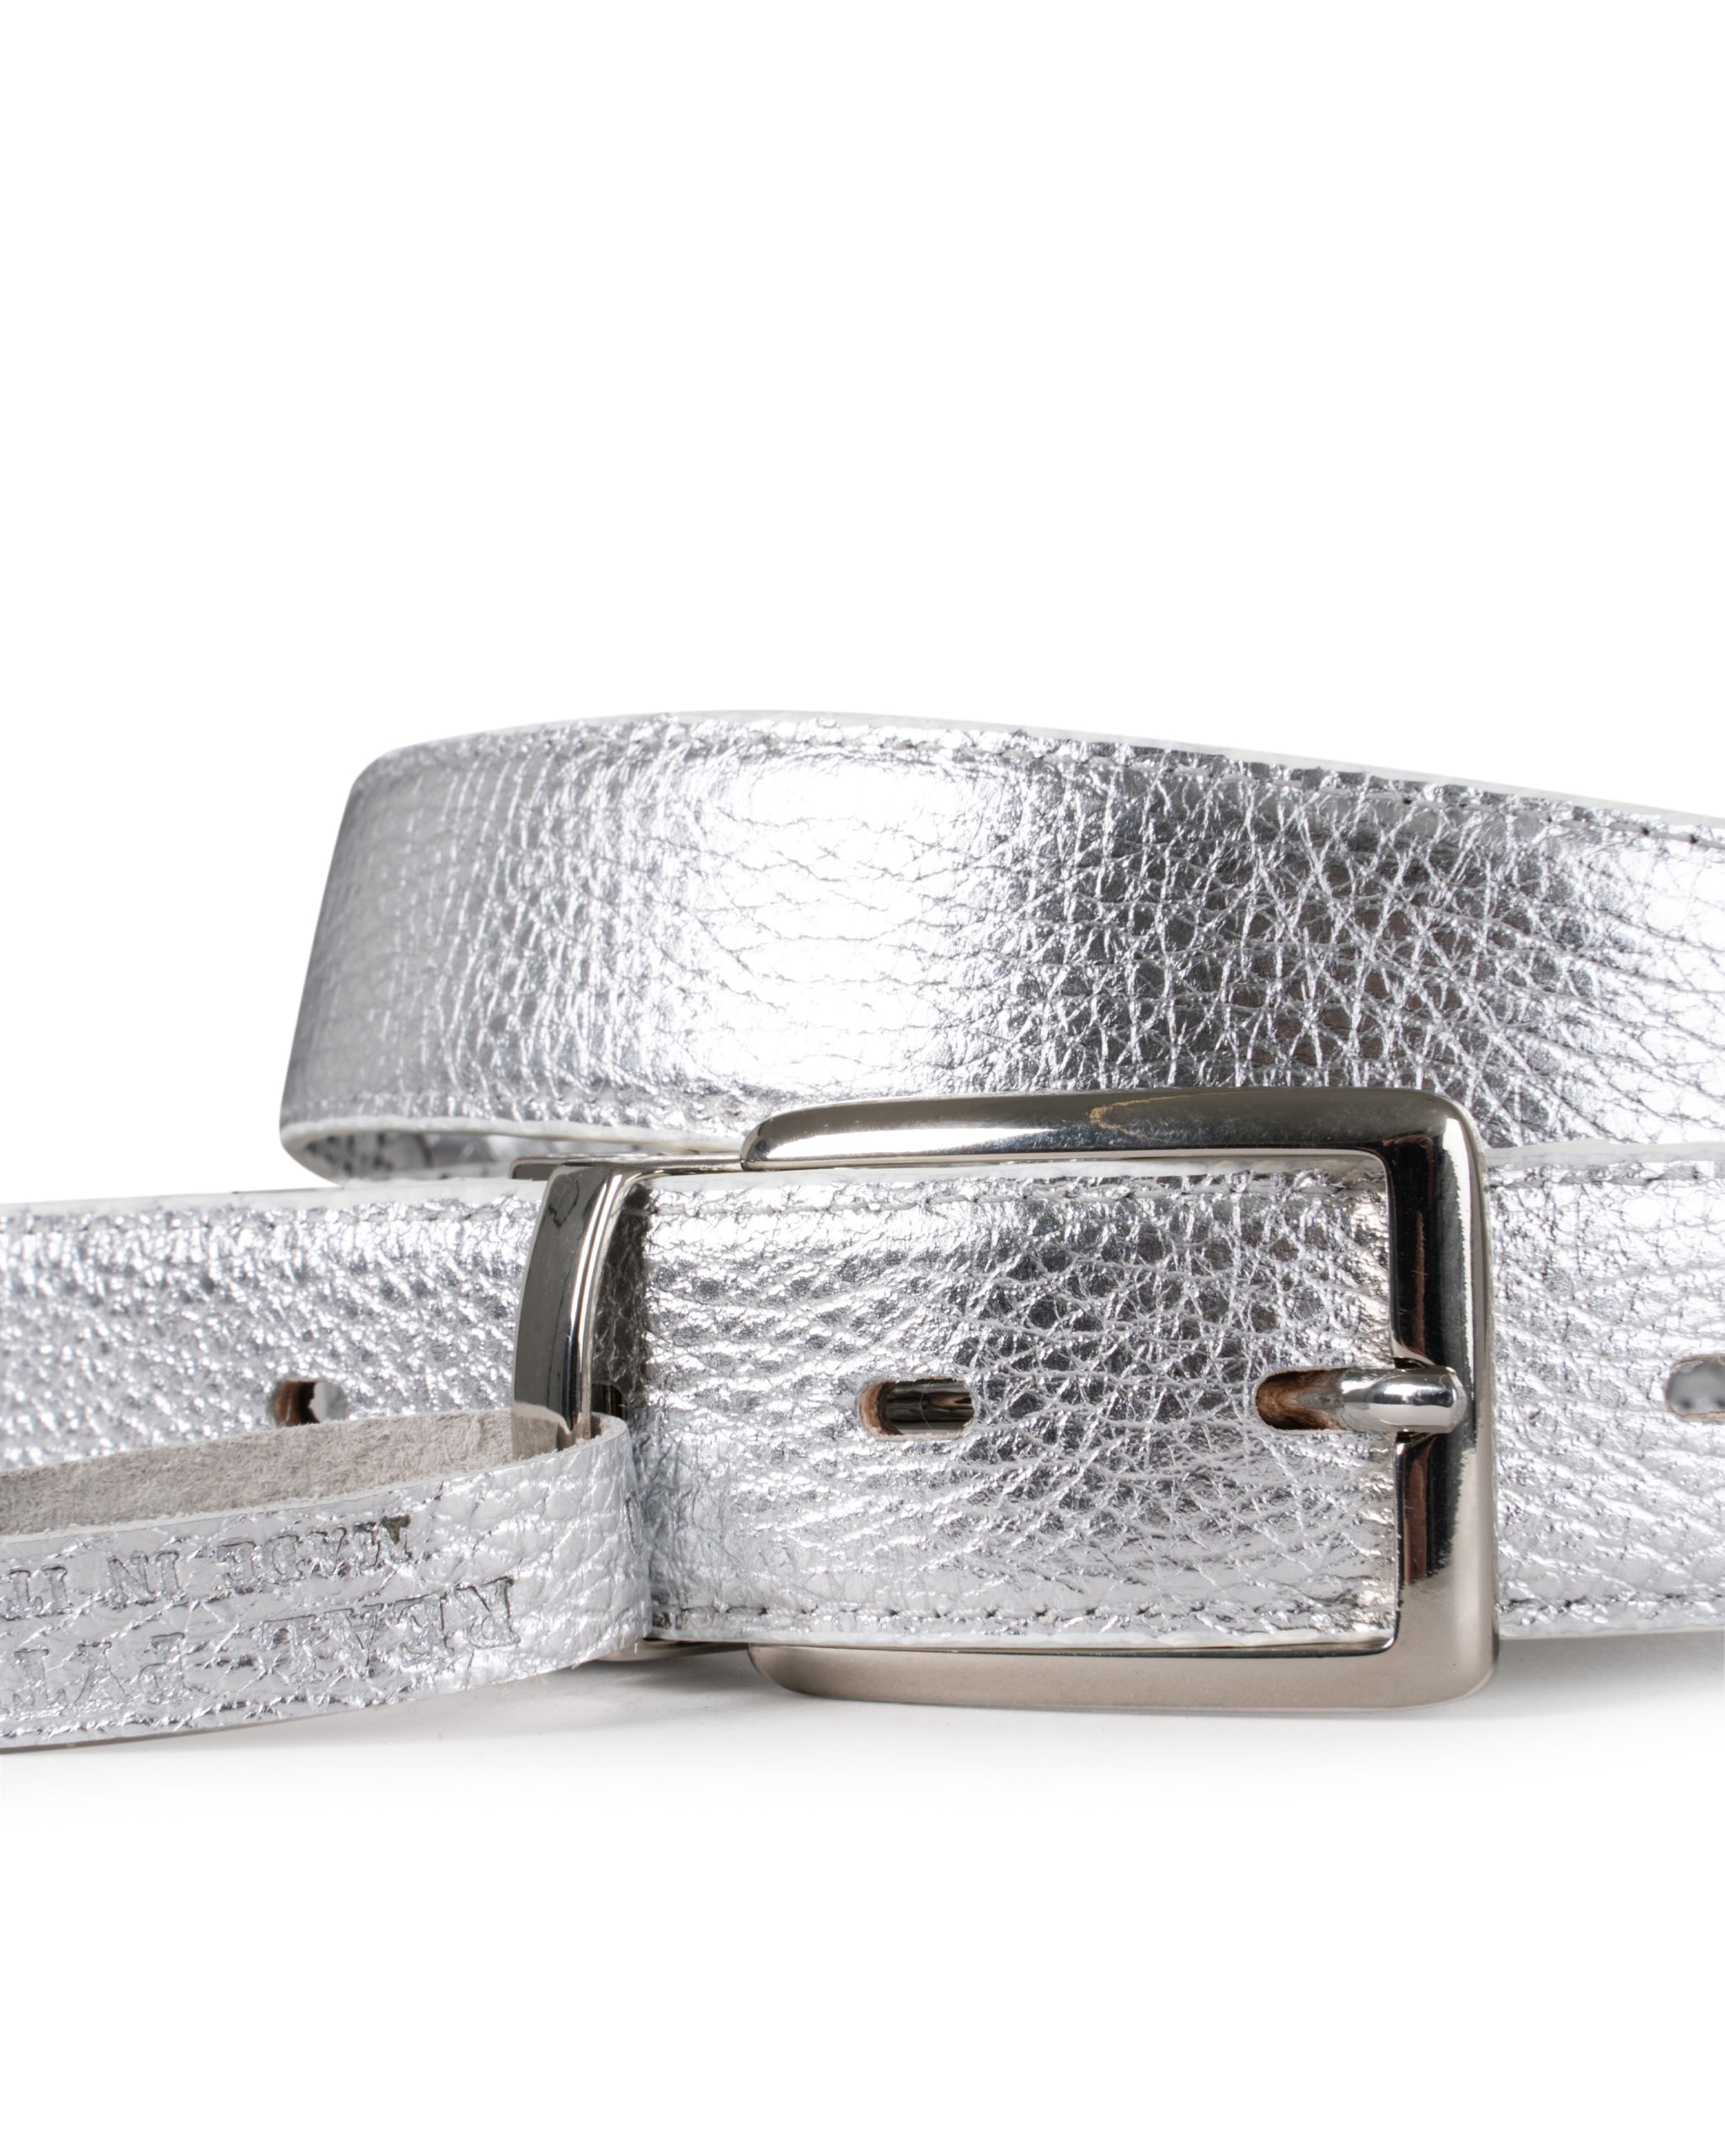 SOFT PITONE REVERSE BELT WITH BUCKLE